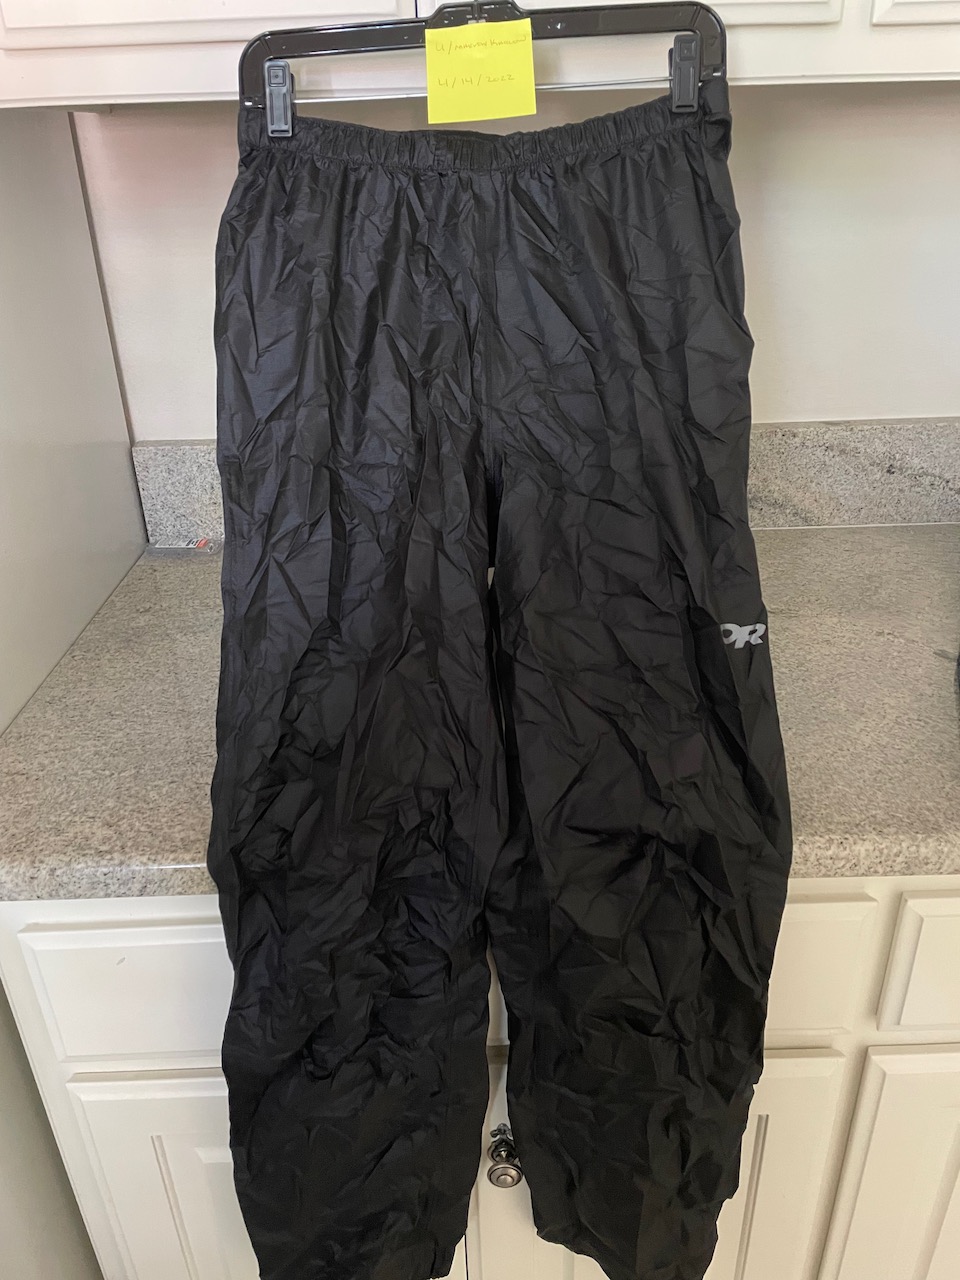 [WTS] OR Helium Pants, new, mens small, 5.0oz - Backpacking Light